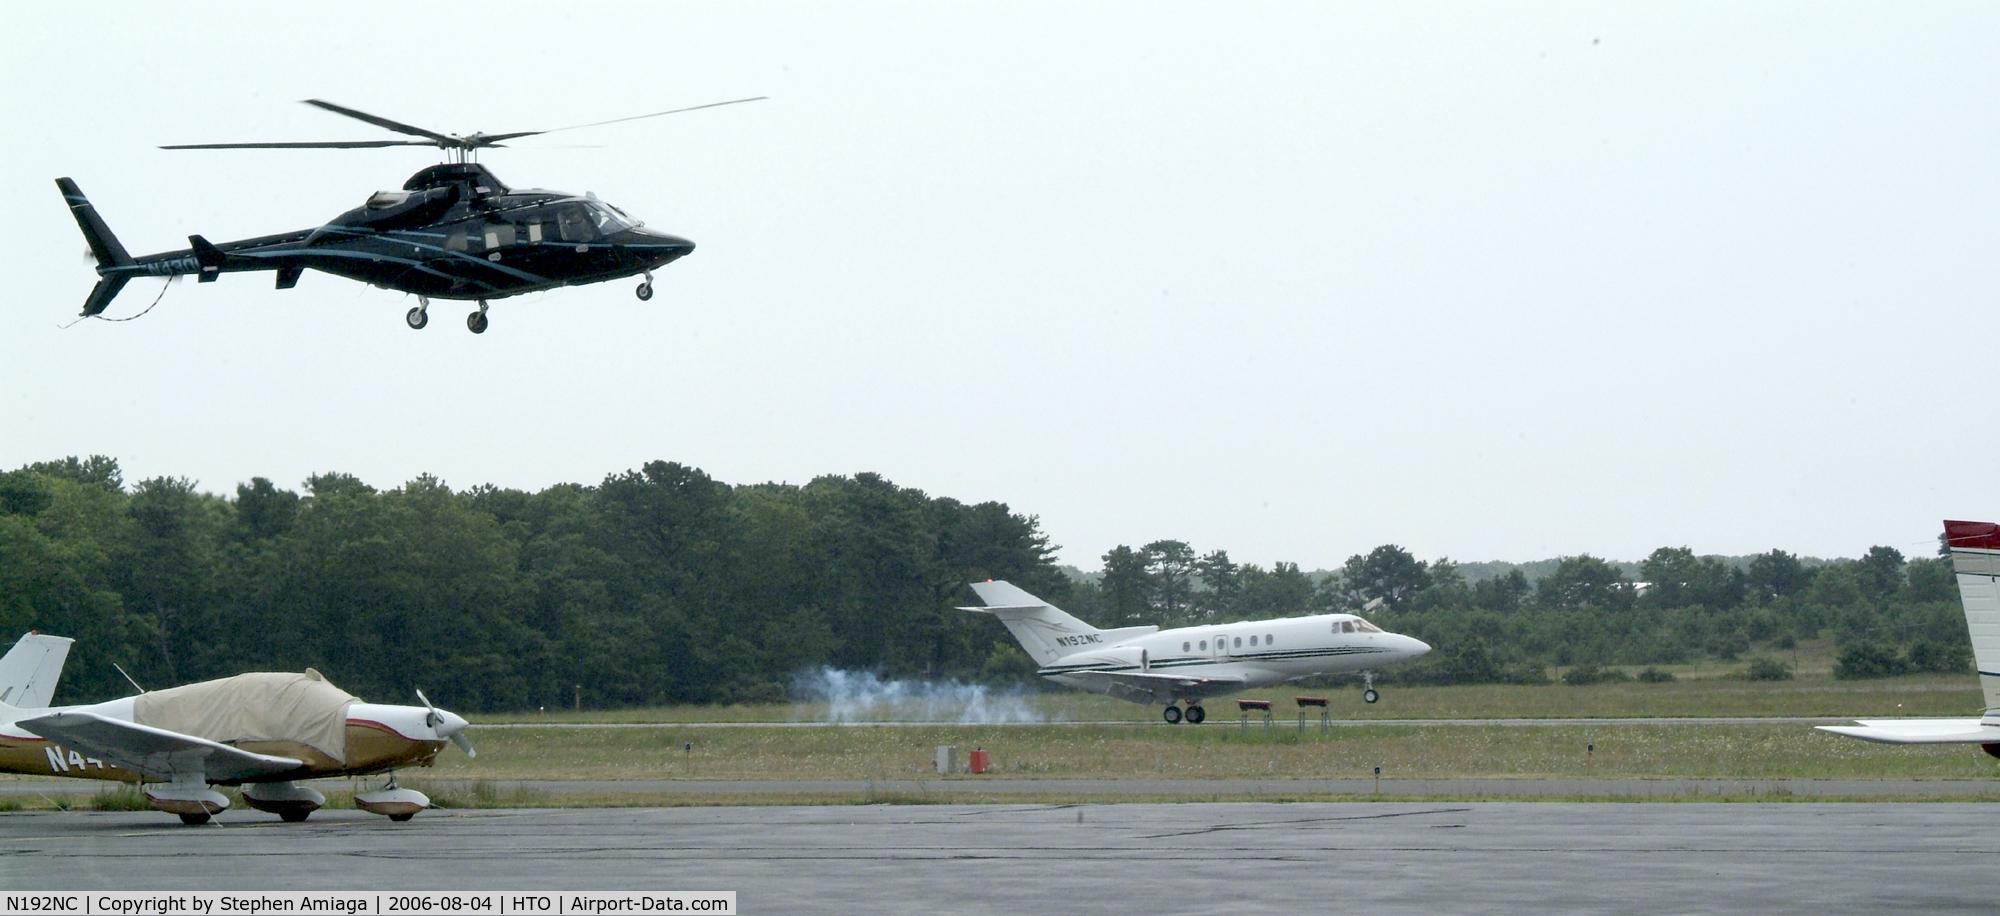 N192NC, 2000 Raytheon Hawker 800XP C/N 258476, 192NC and 430 HF arrive simultaneously with their weekend visitors...